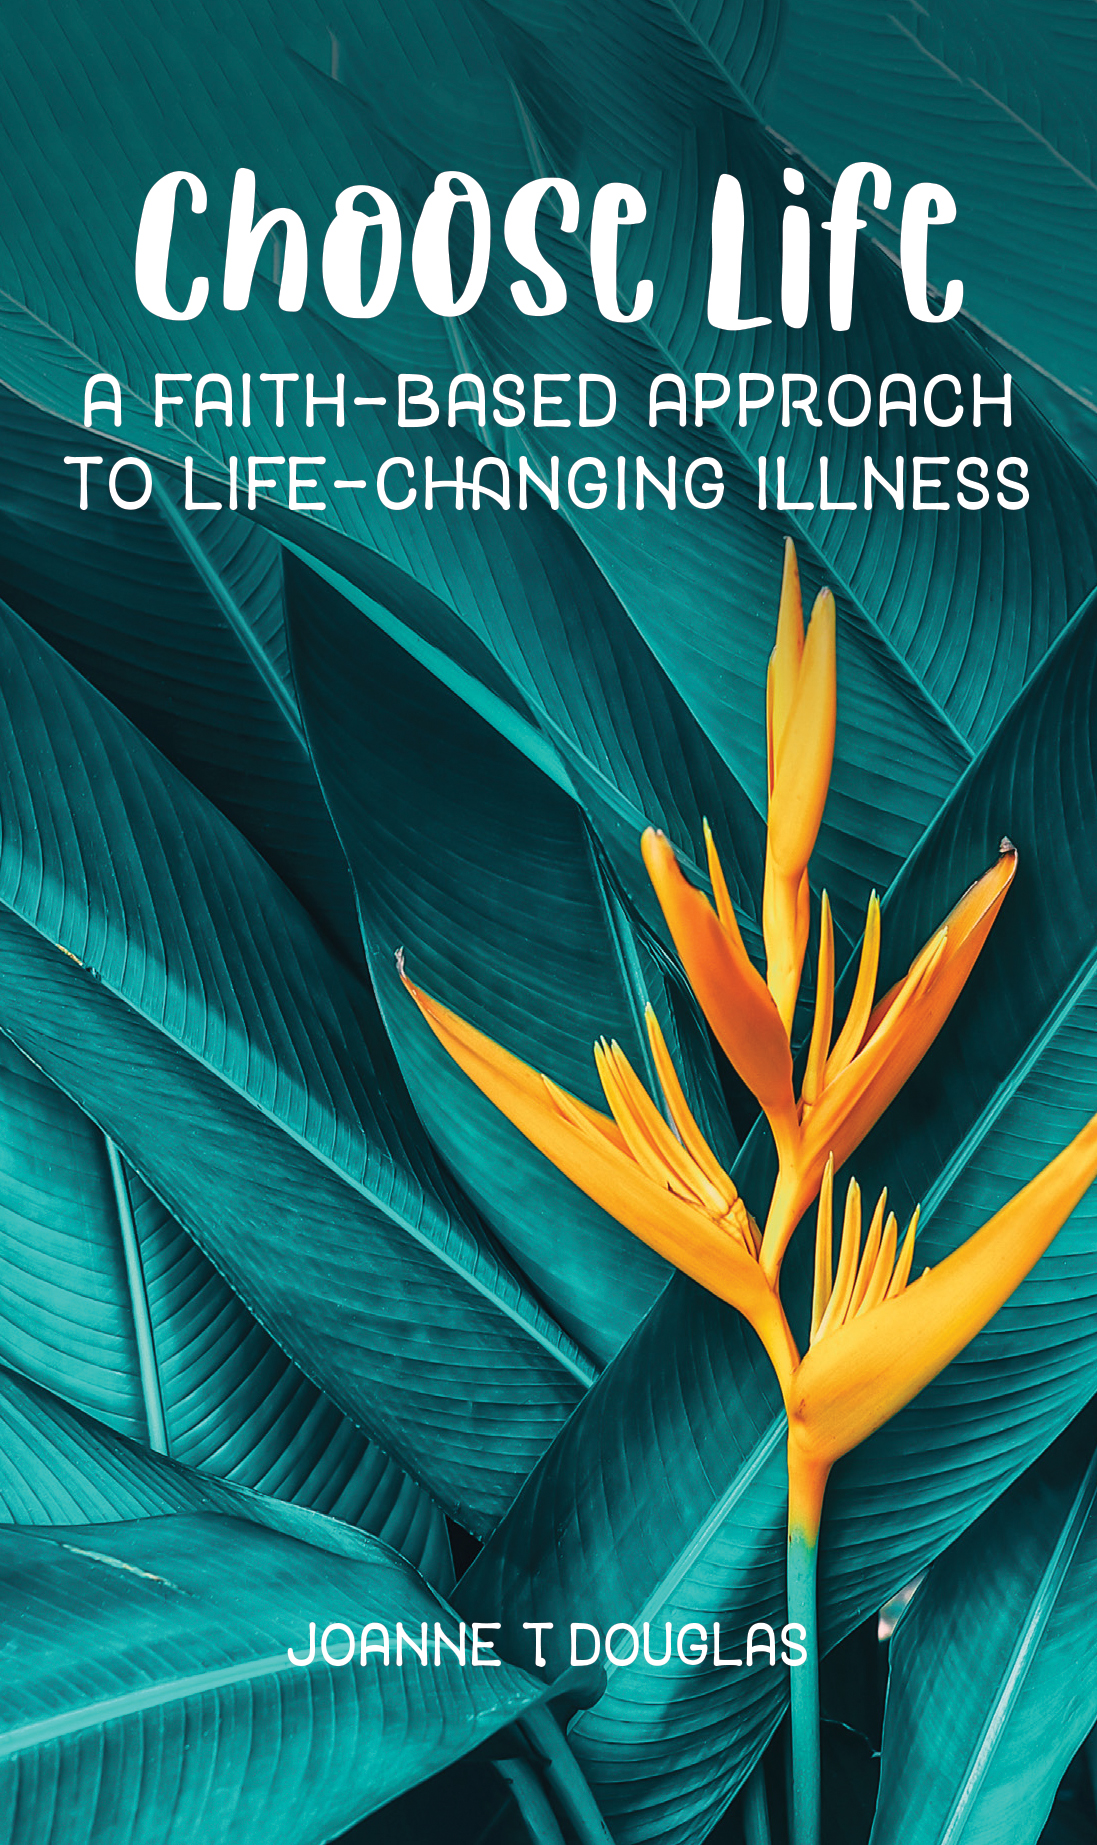 Choose Life: A Faith-Based Approach to Life-Changing Illness